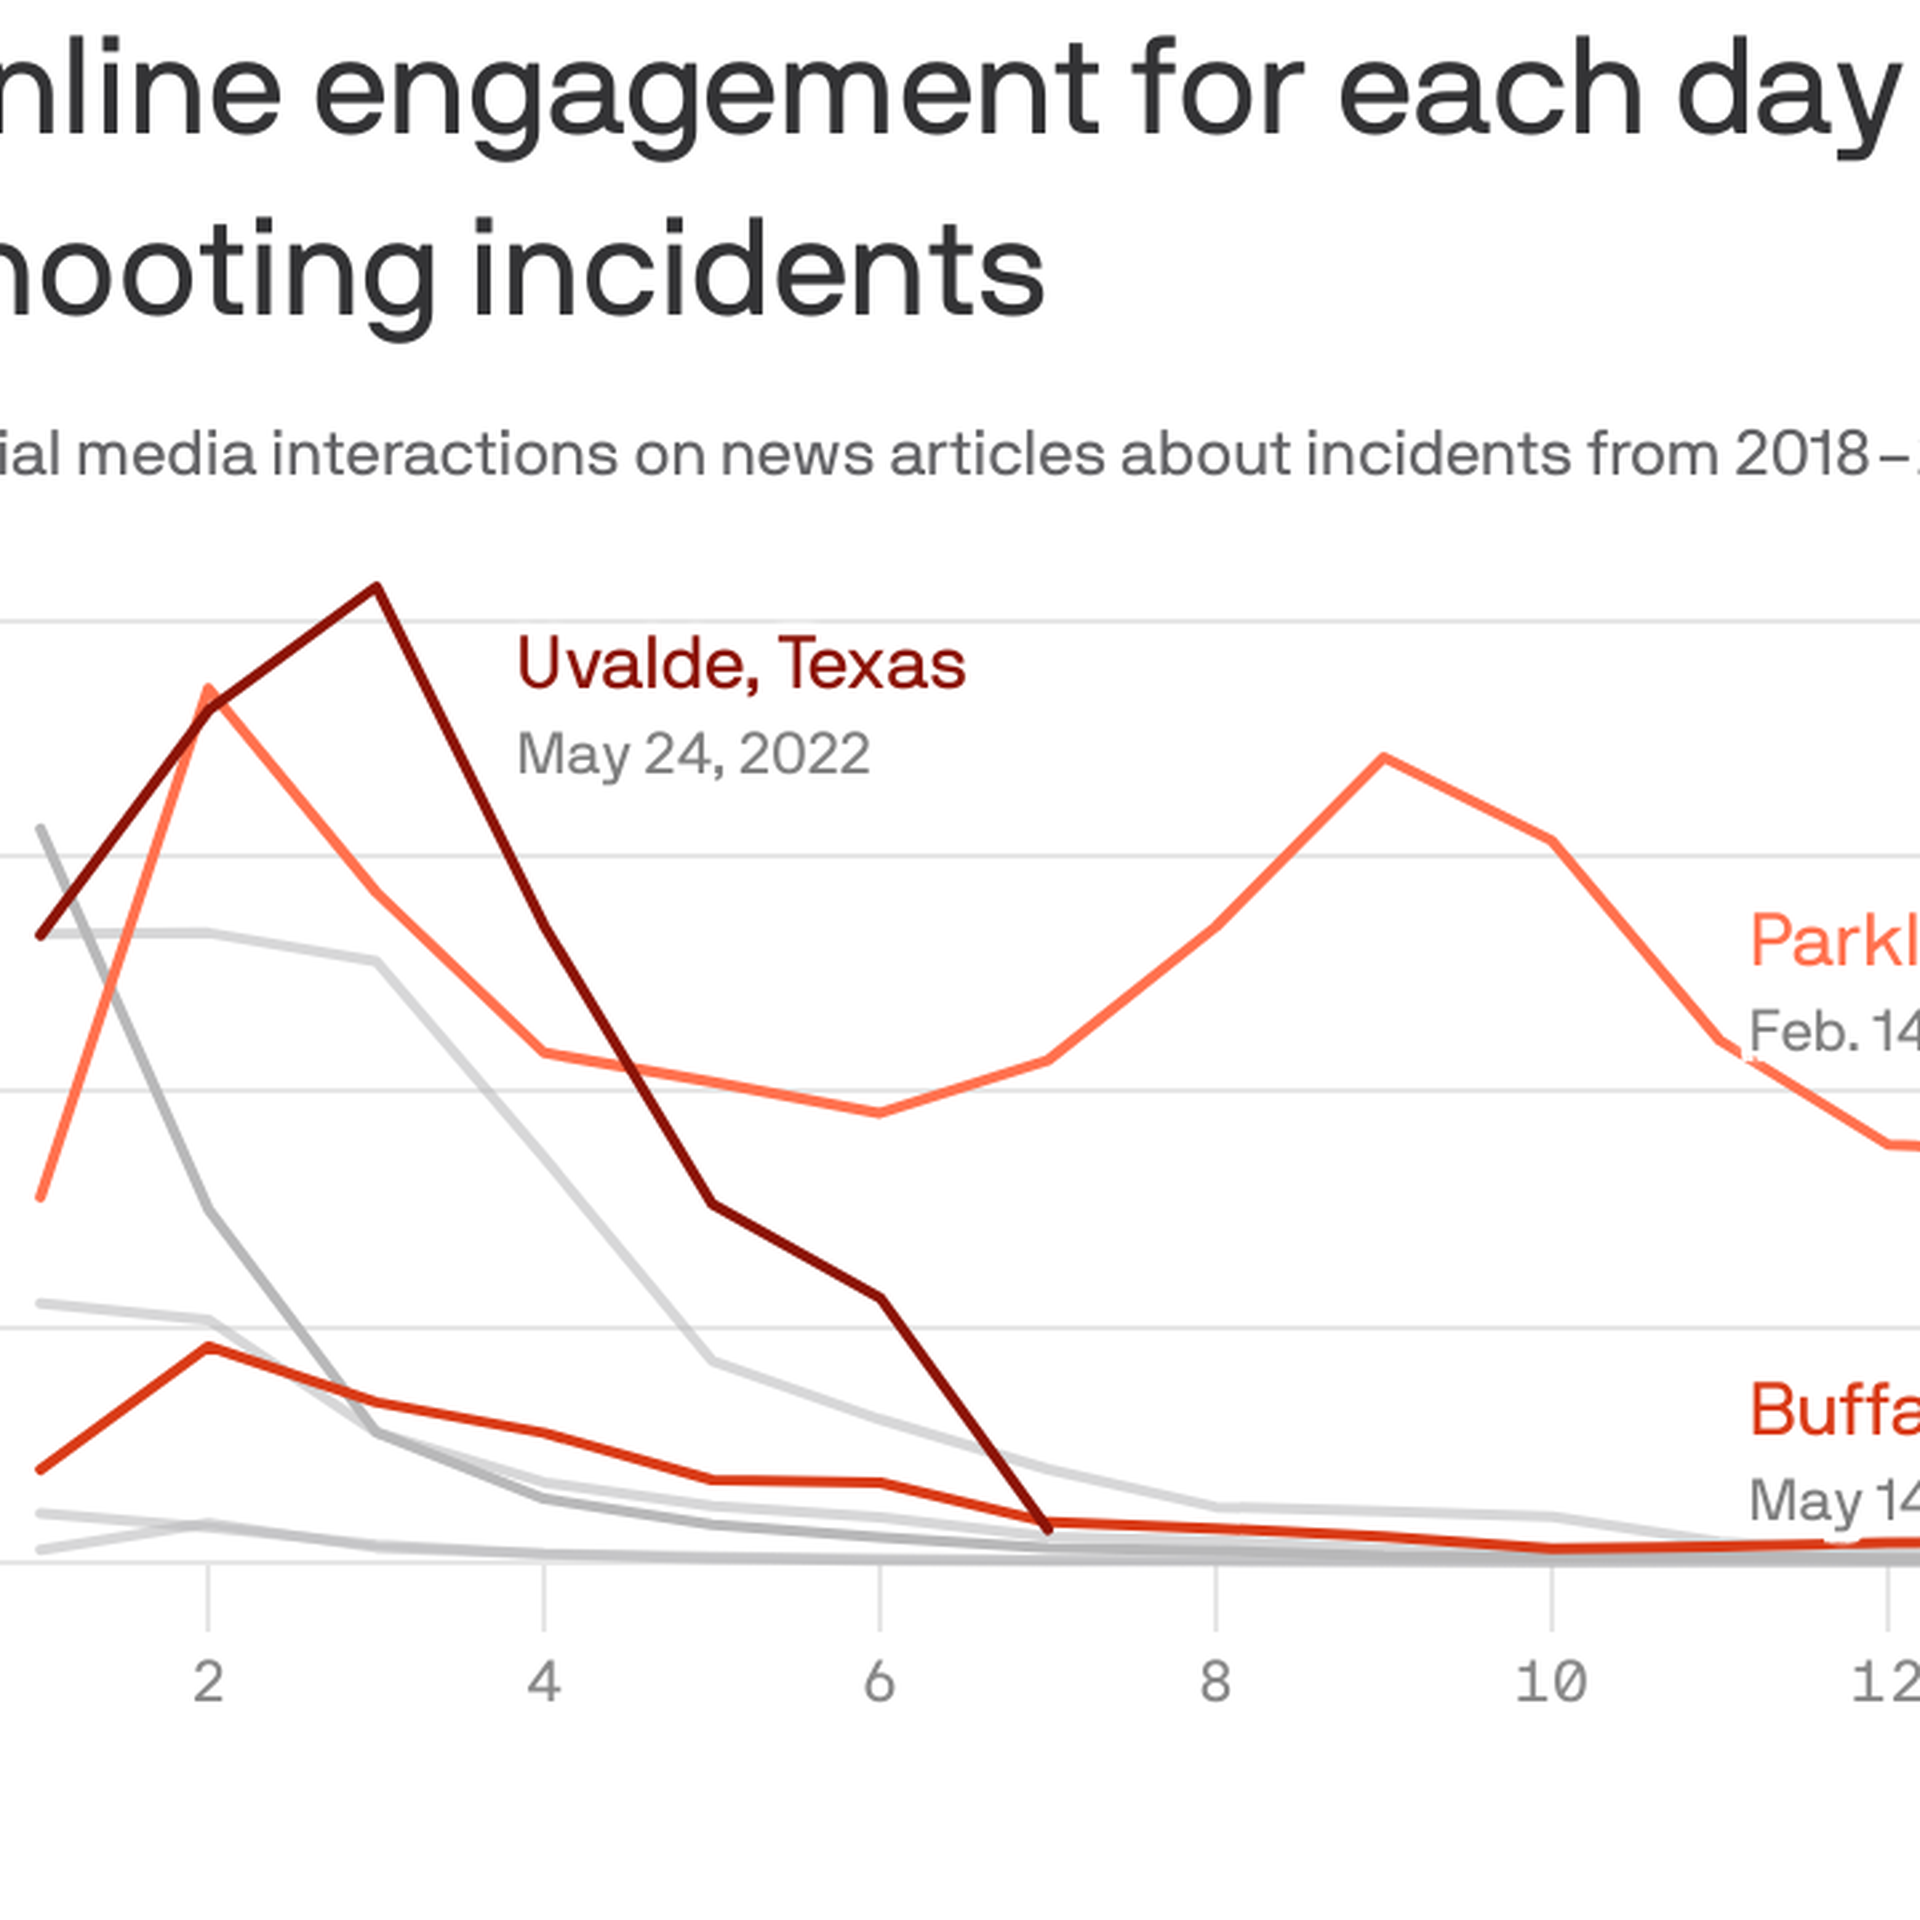 A chart showing online engagement for each day after select U.S. mass shooting incidents.